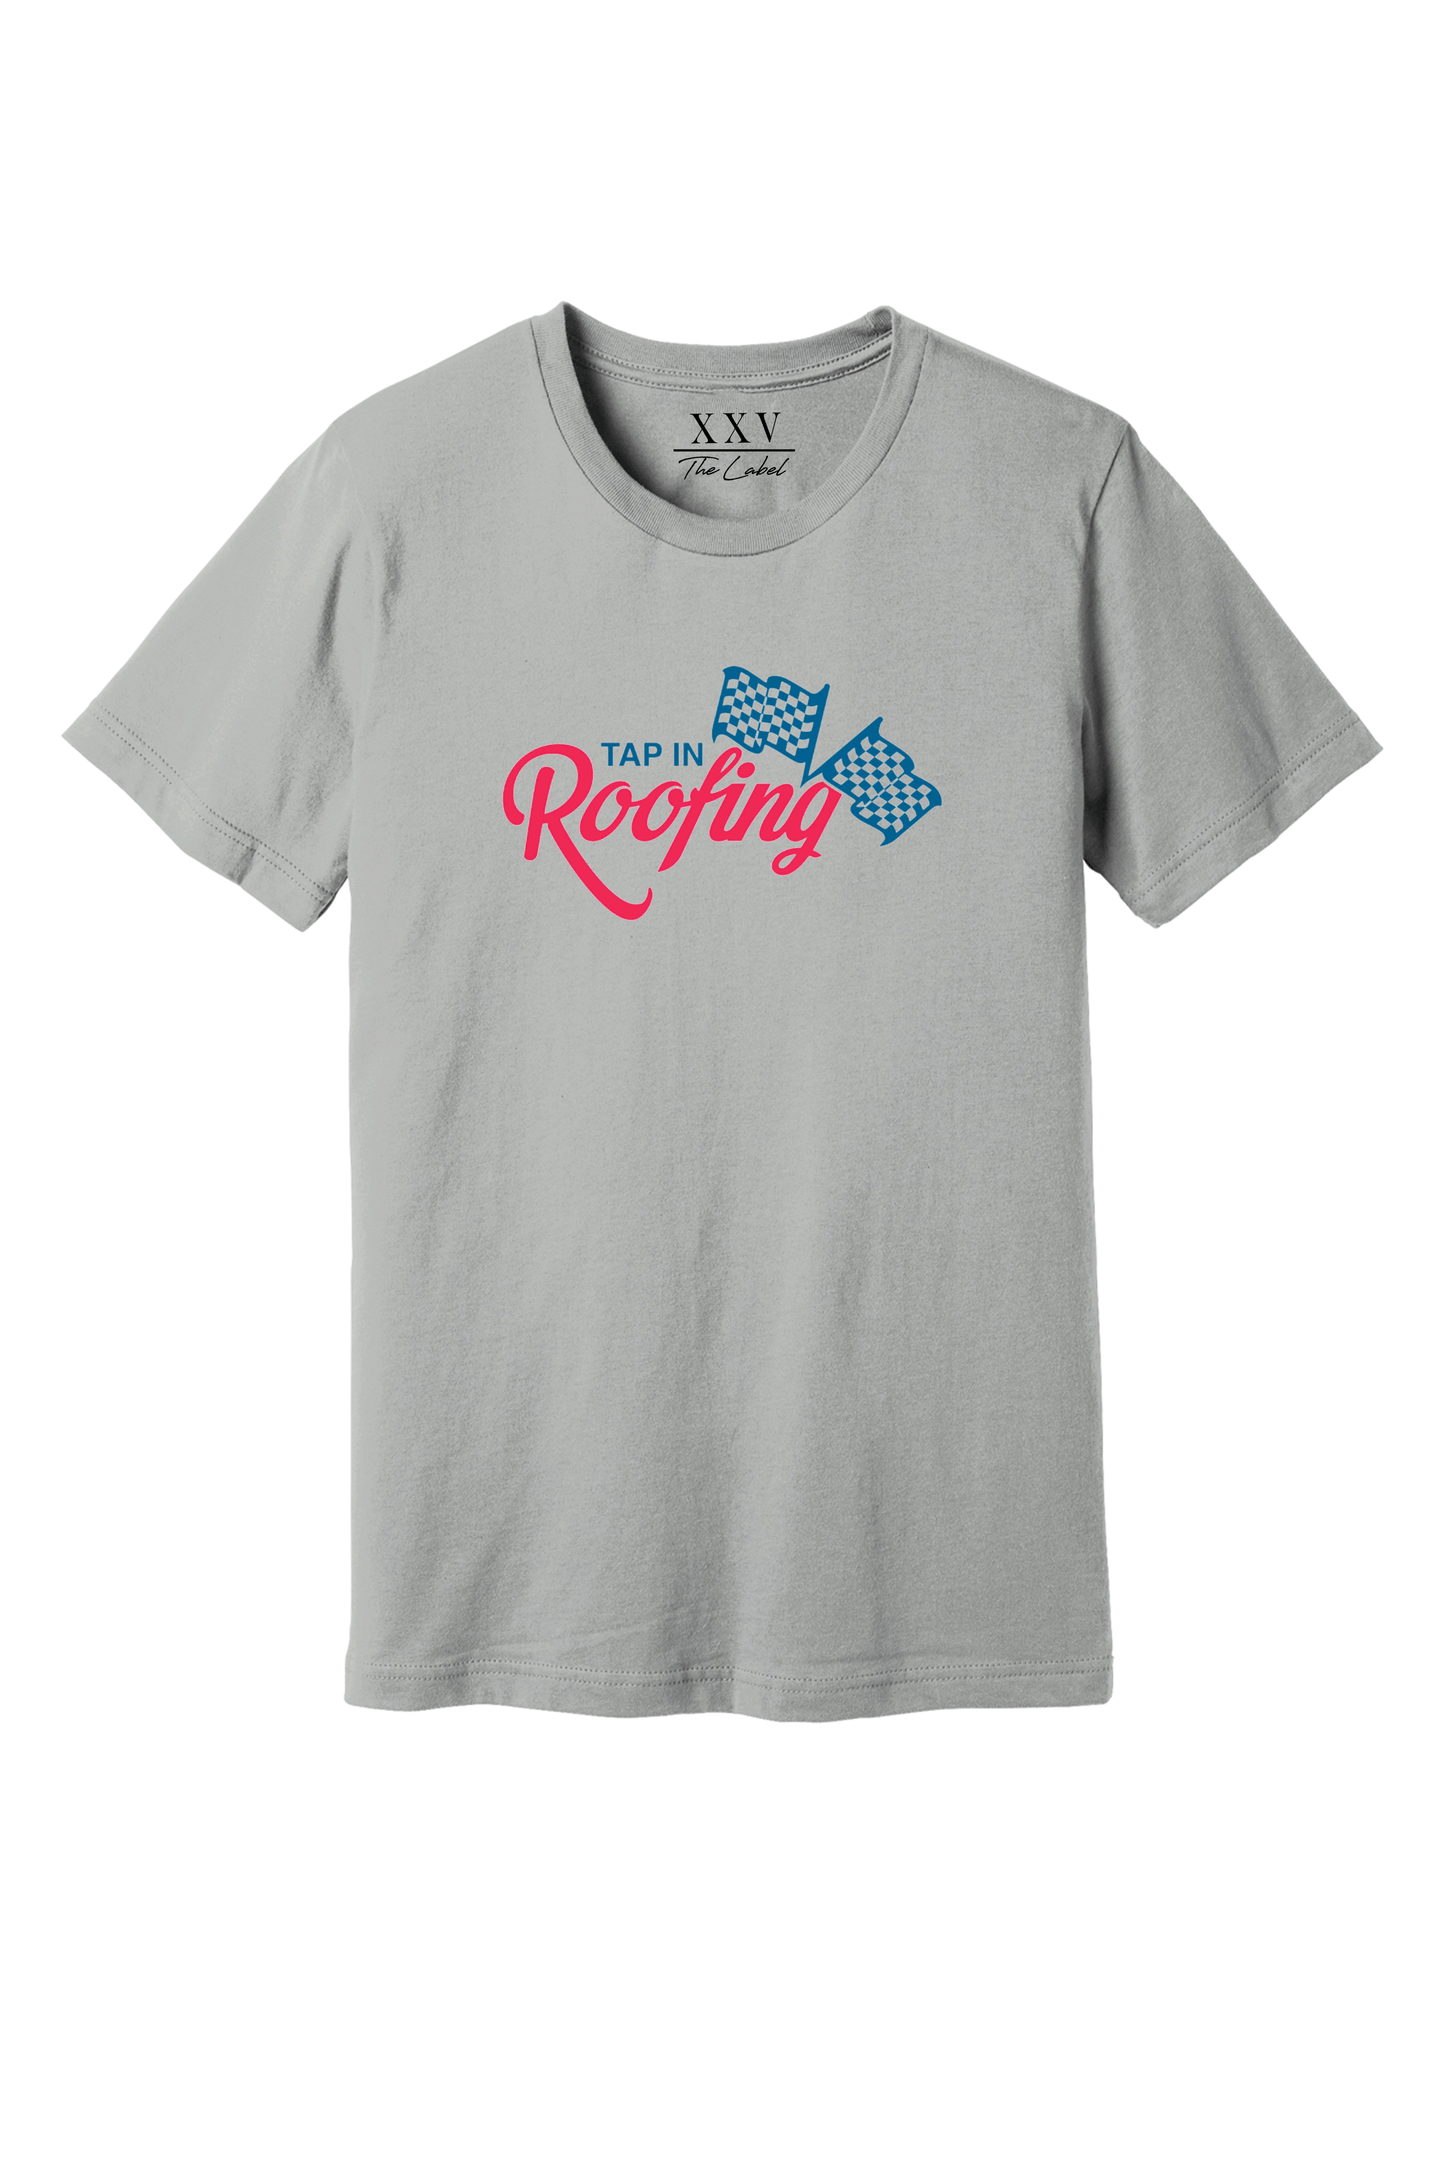 Tap In Roofing T-Shirt